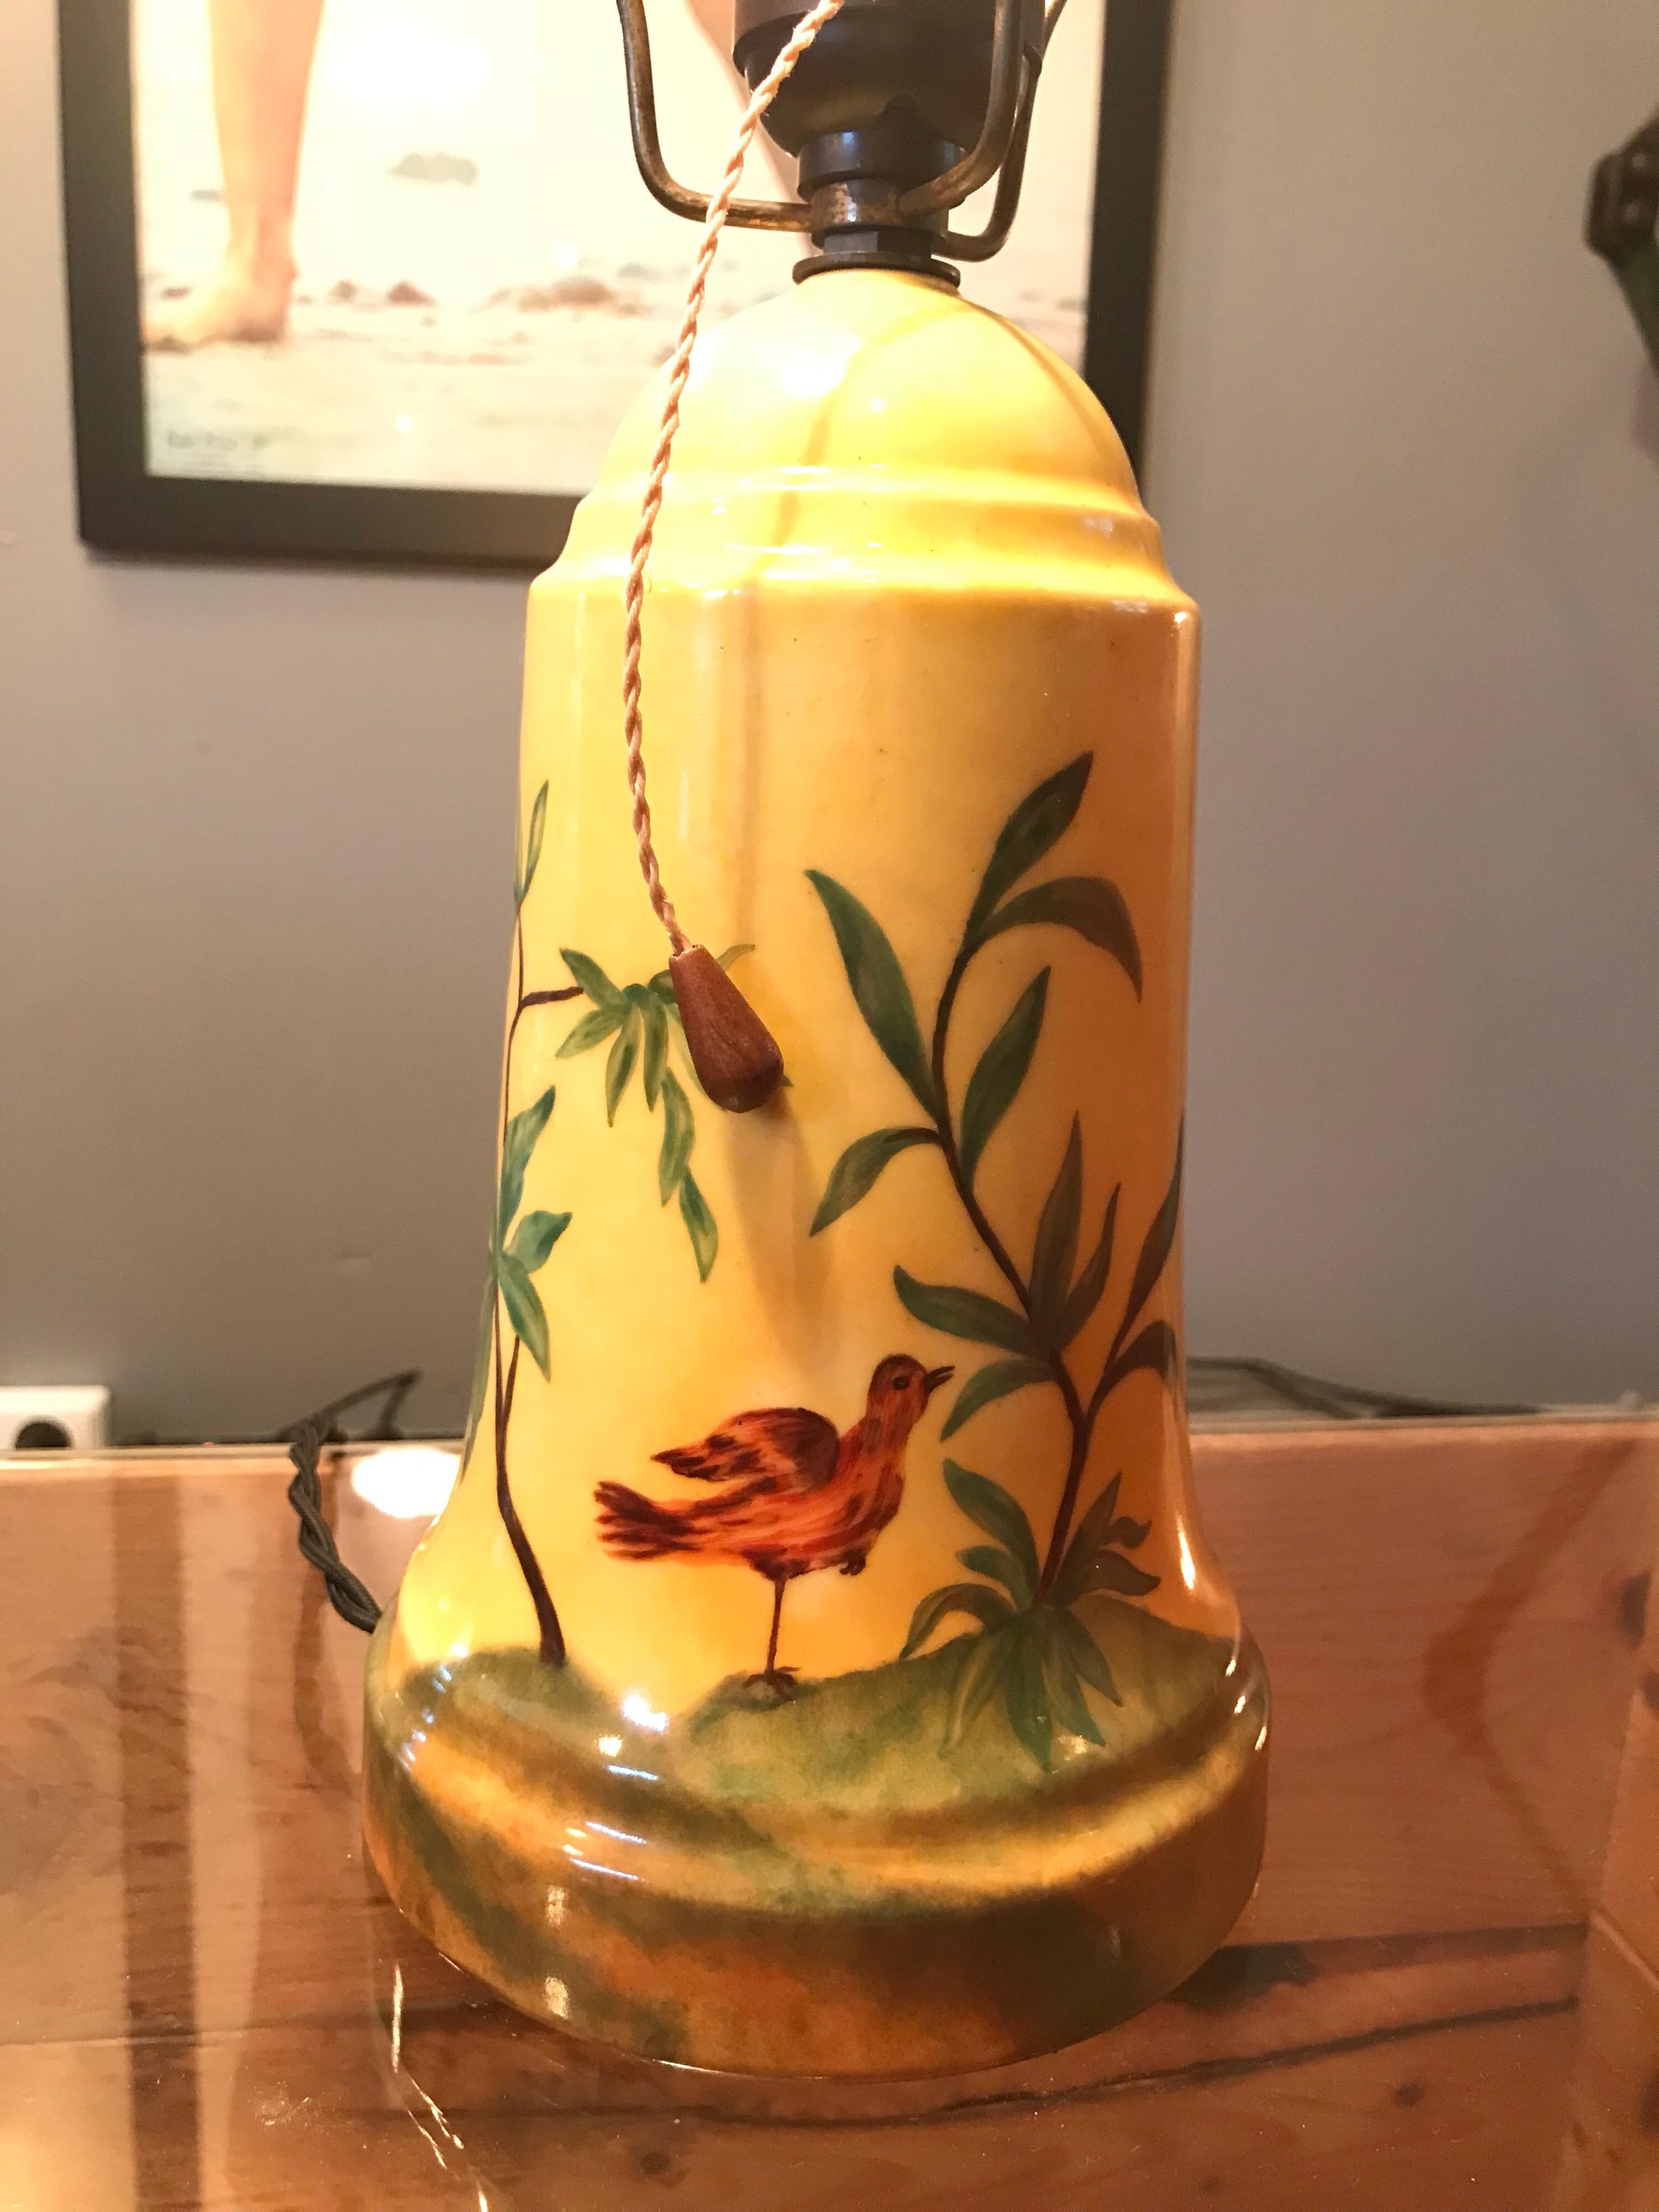 Beautiful hand-painted ceramic table lamp by Jens Peter Dahl Jensen of Copenhagen.
Dated to 1934 from the text on the bottom 